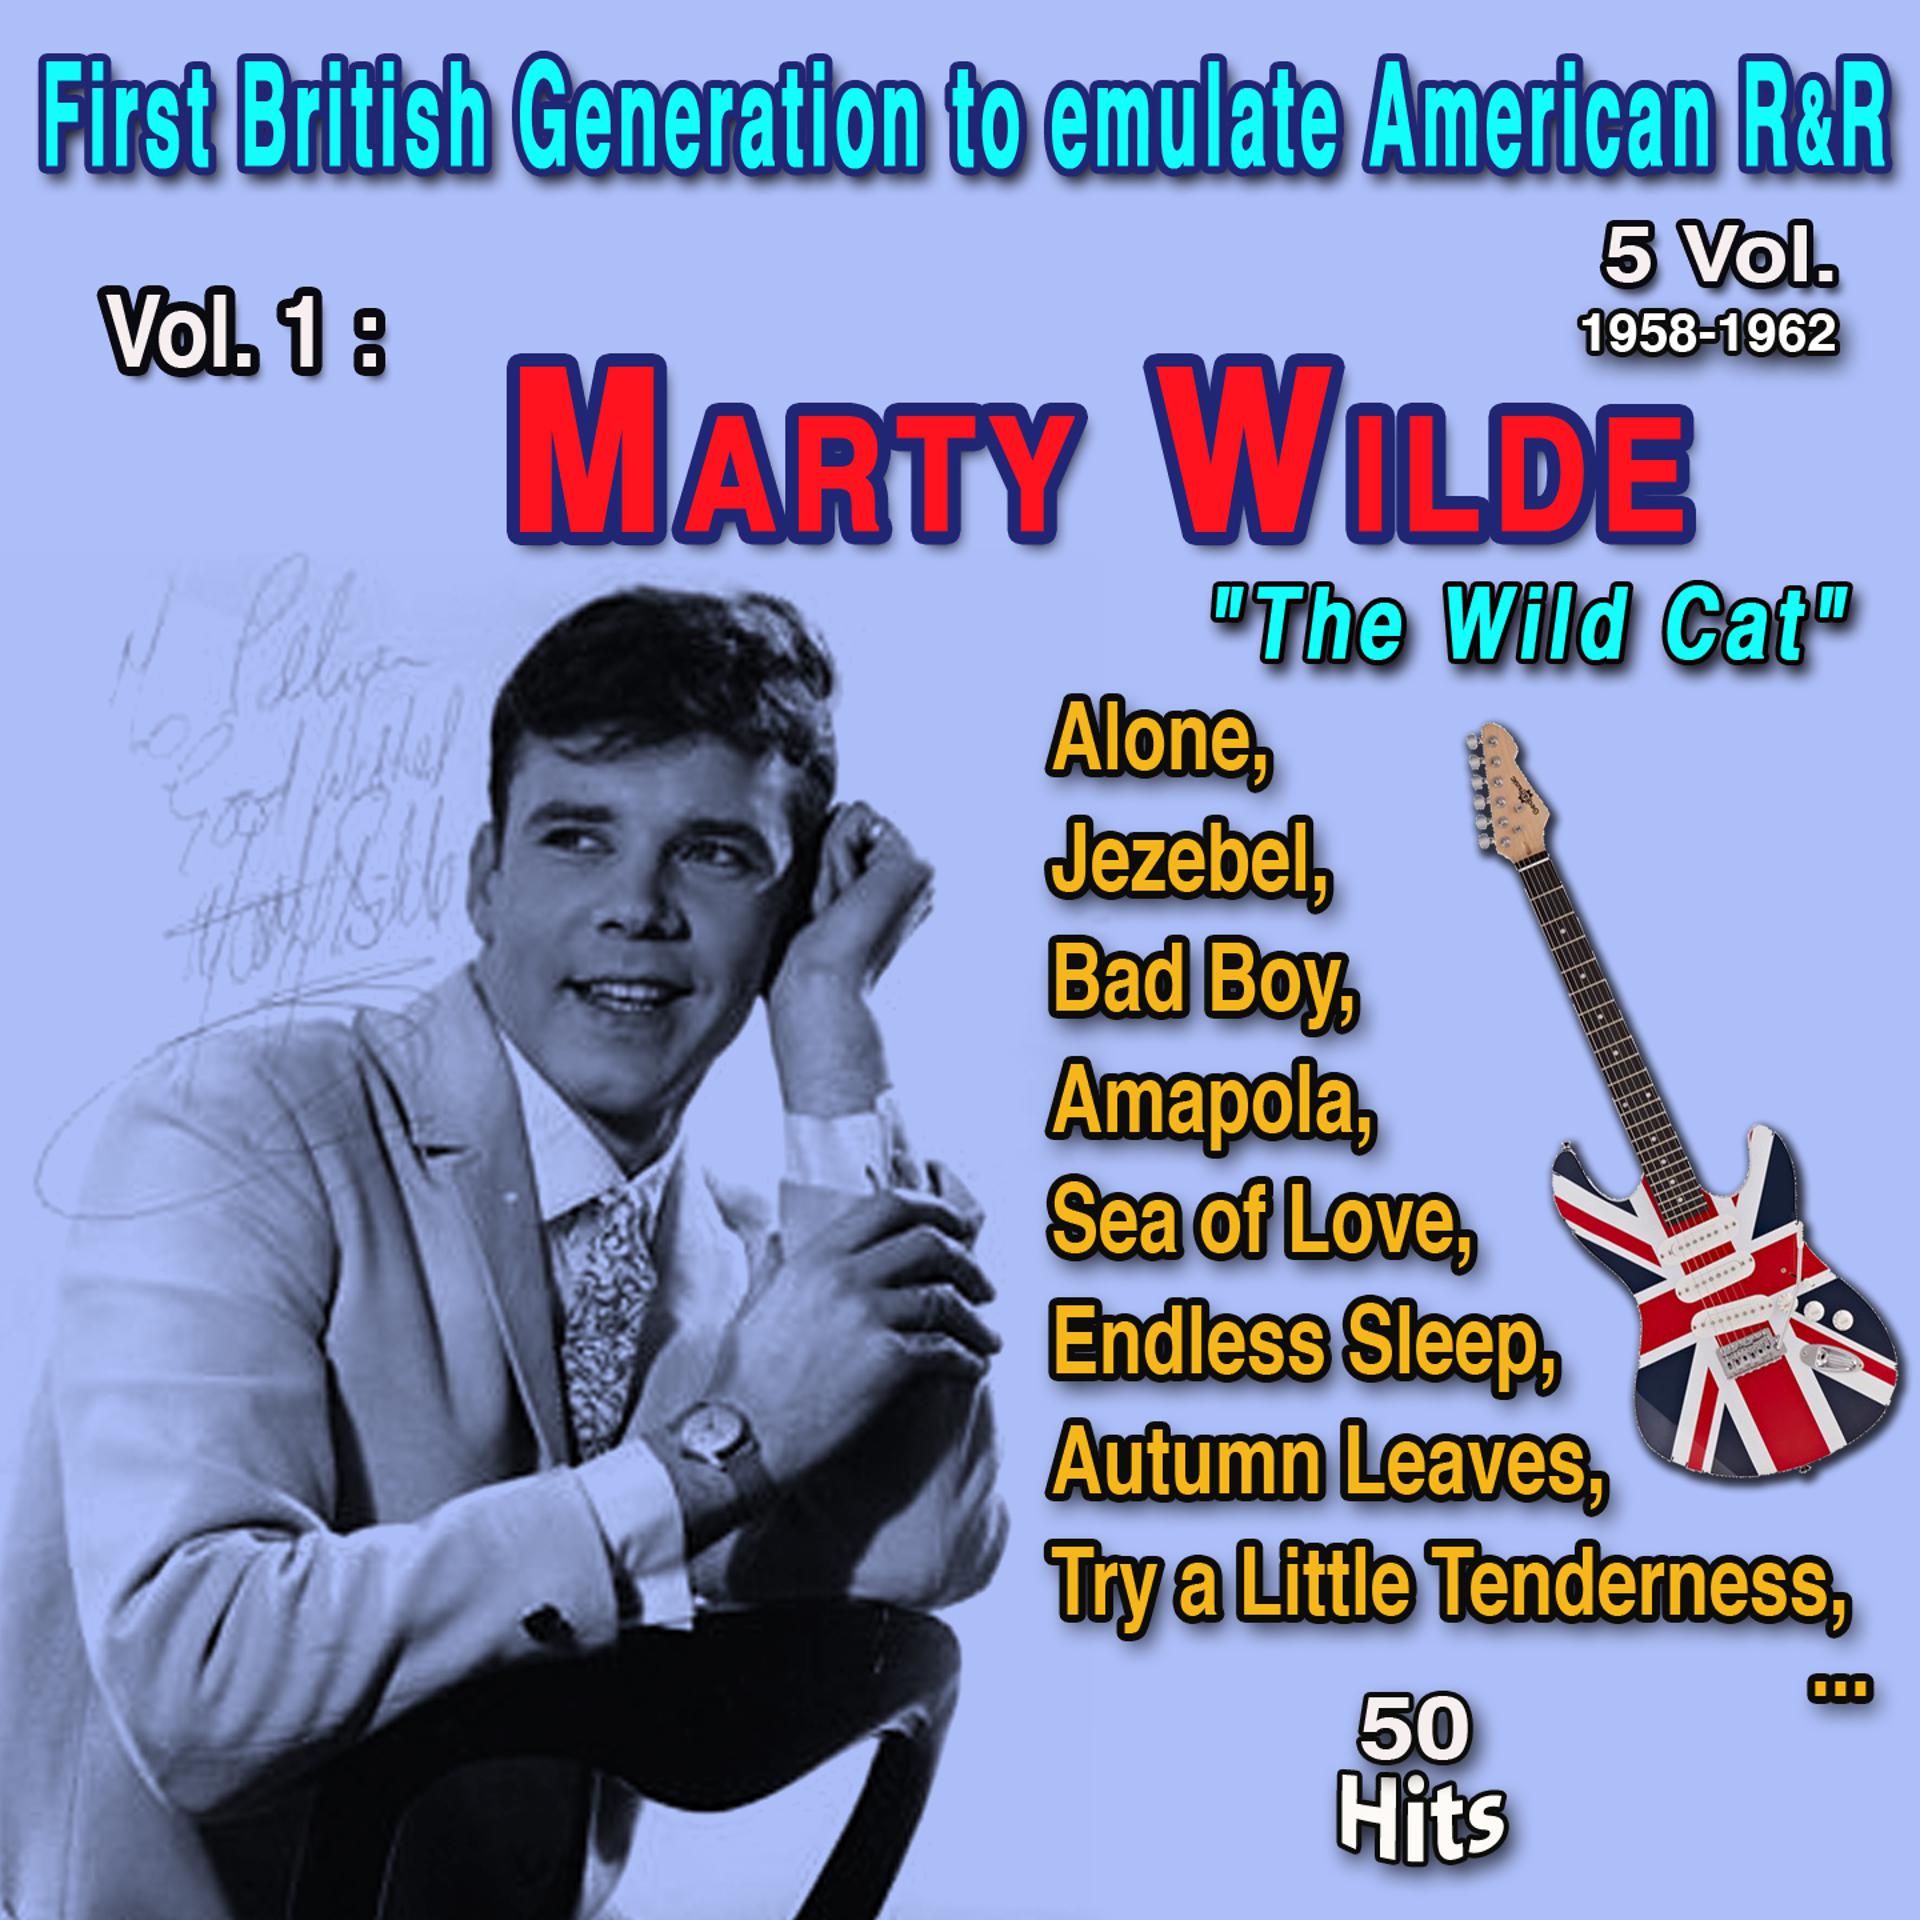 Постер альбома First British Generation to emulate American Rock and Roll 5 Vol. - 1958-1962 Vol. 1 : Marty Wilde "The Wildcat"